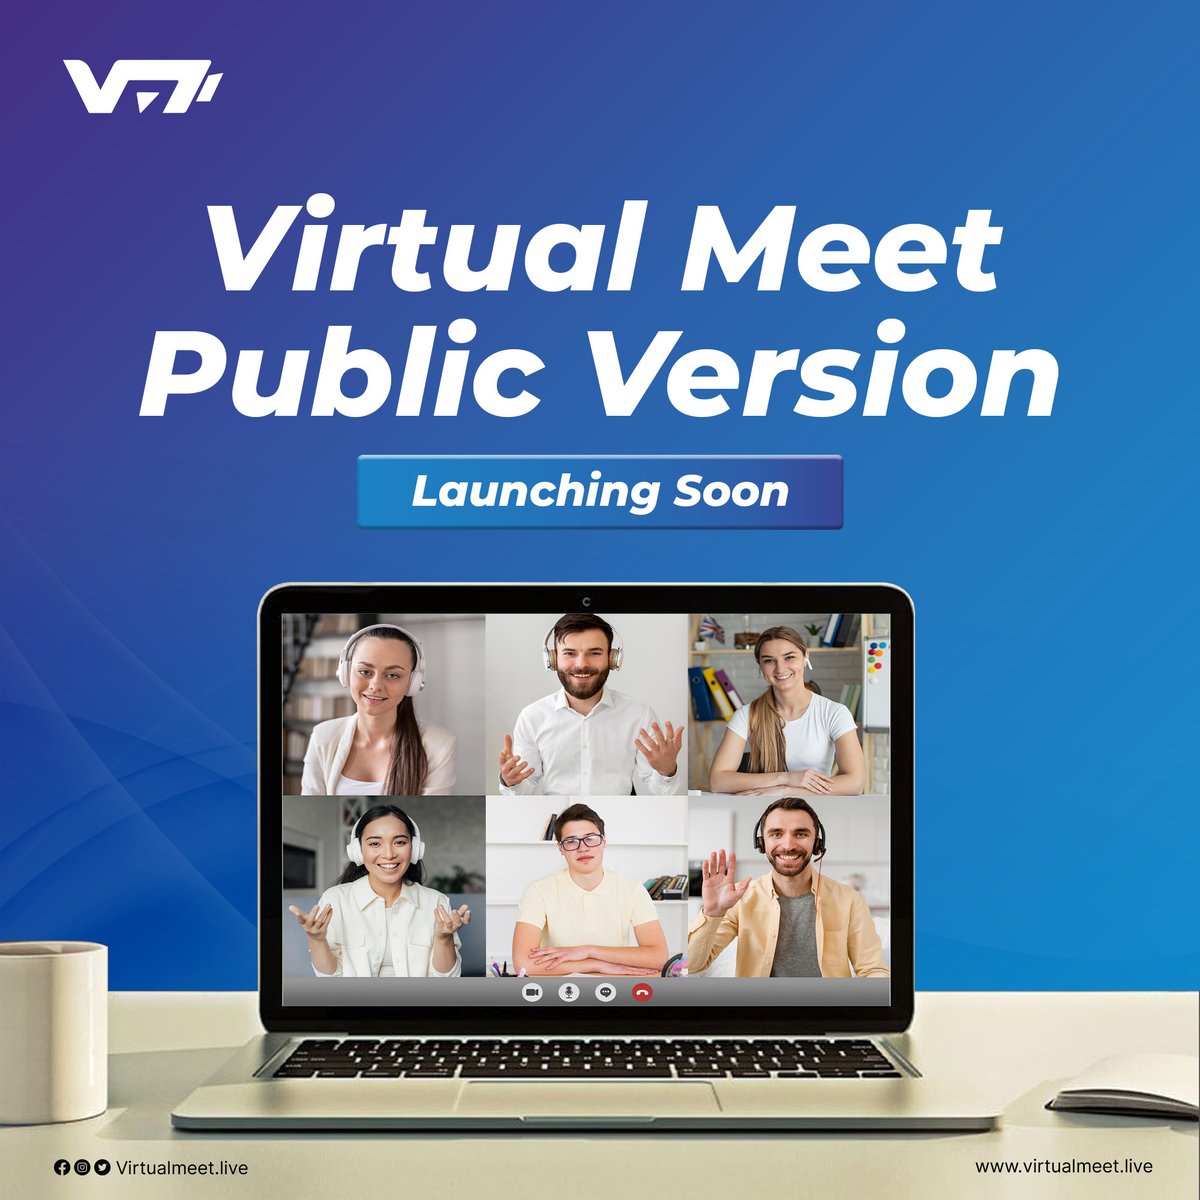 Get ready to connect like never before! The highly anticipated public version of Virtual Meet is on the horizon.

#VirtualMeet #Networking #Collaboration #OnlineEvents #VirtualEvents #Tech #Innovation #GlobalCommunity #DigitalNetworking #Connect #Launch #ComingSoon